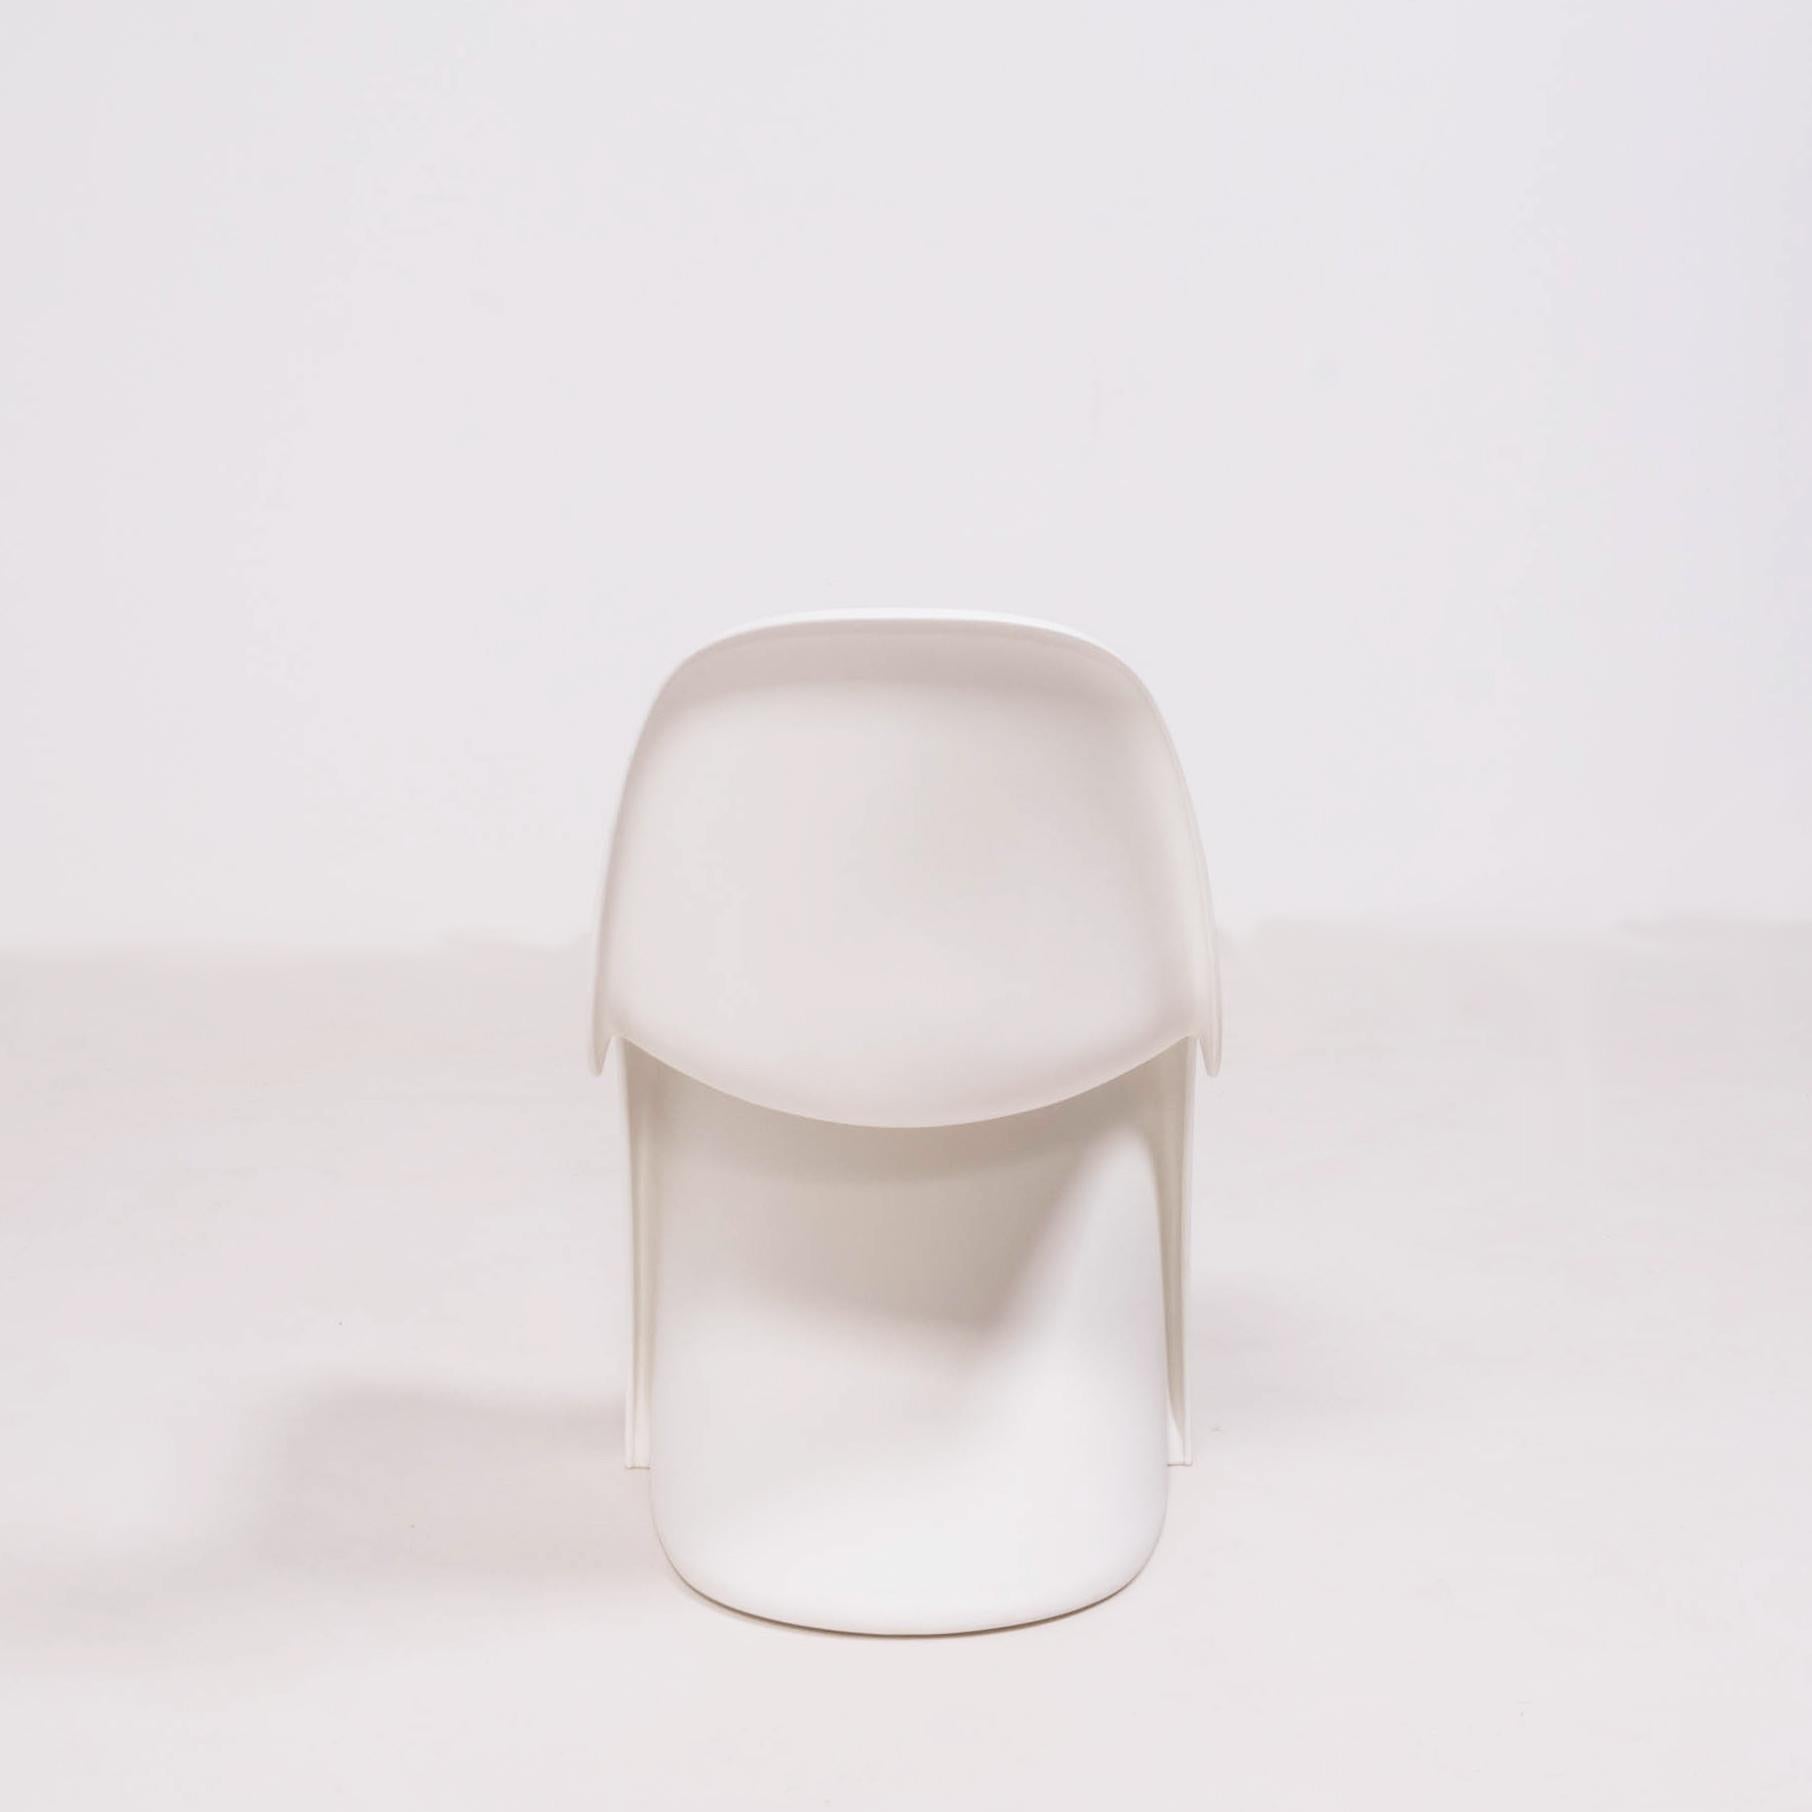 Contemporary Mid Century Modern White Panton Chairs by Verner Panton for Vitra